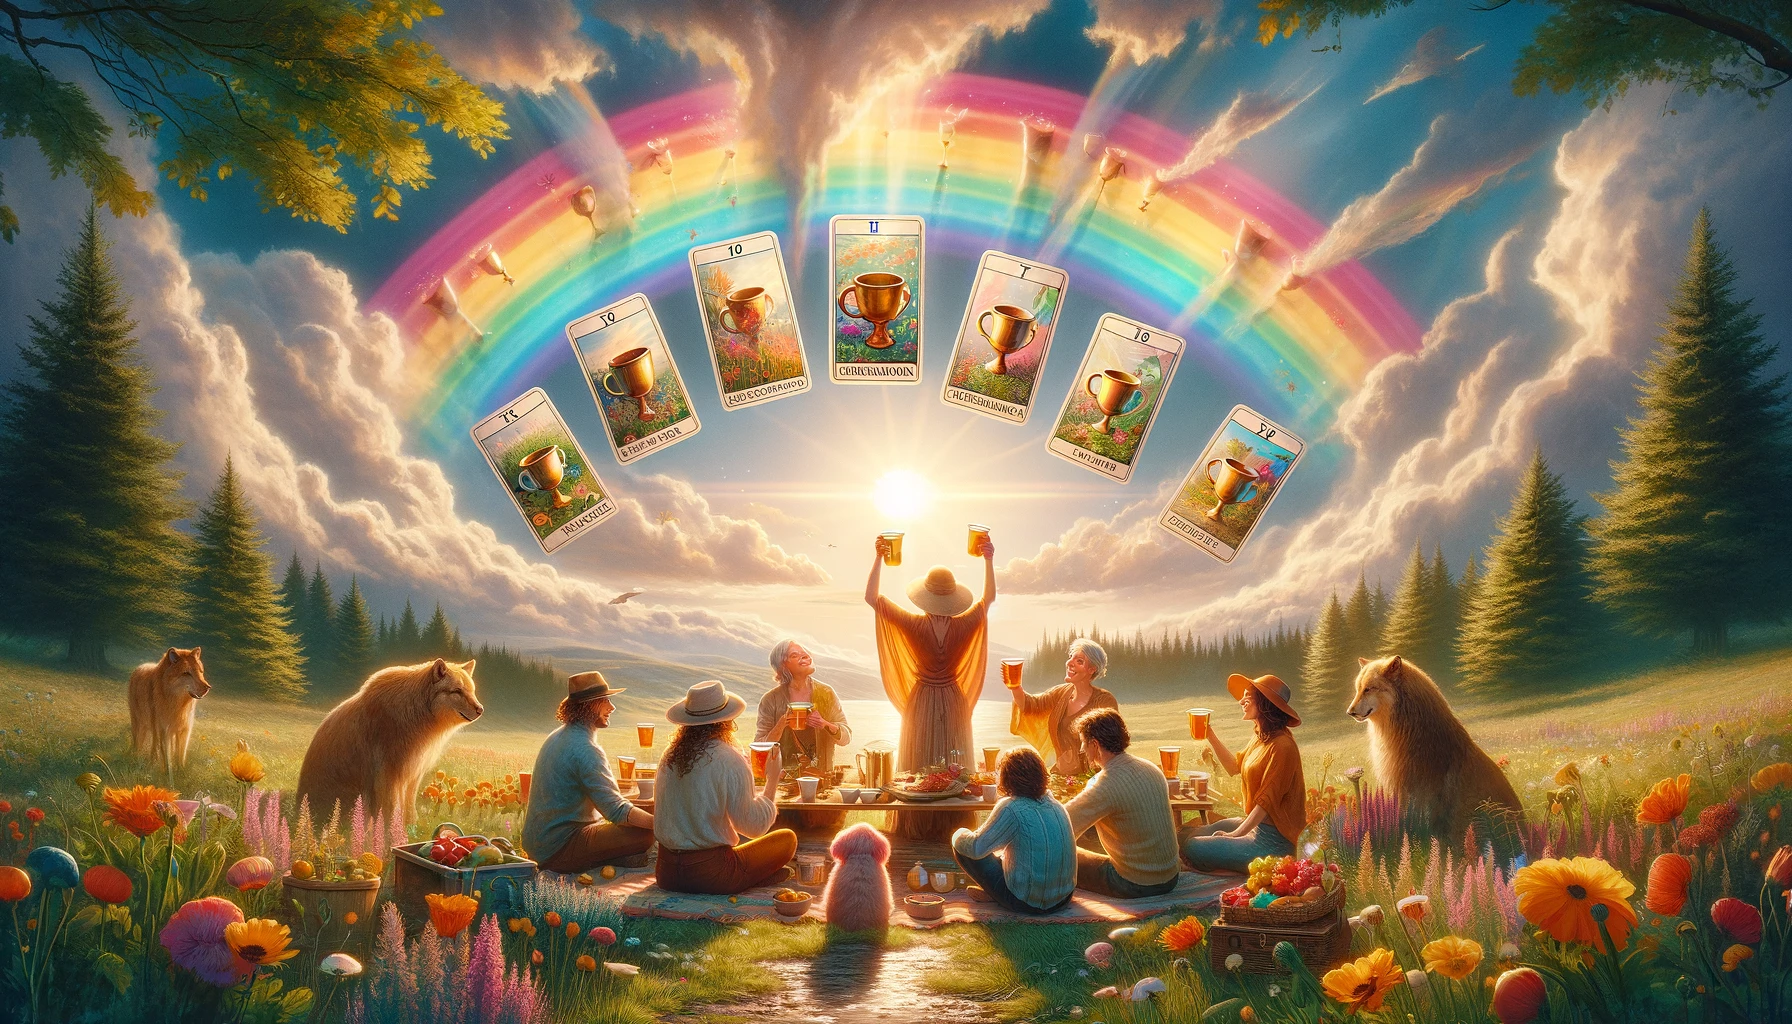 "Illustration depicting a blissful and harmonious family or community gathering under a vibrant rainbow, symbolizing the ultimate realization of happiness, emotional fulfillment, and contentment in relationships."